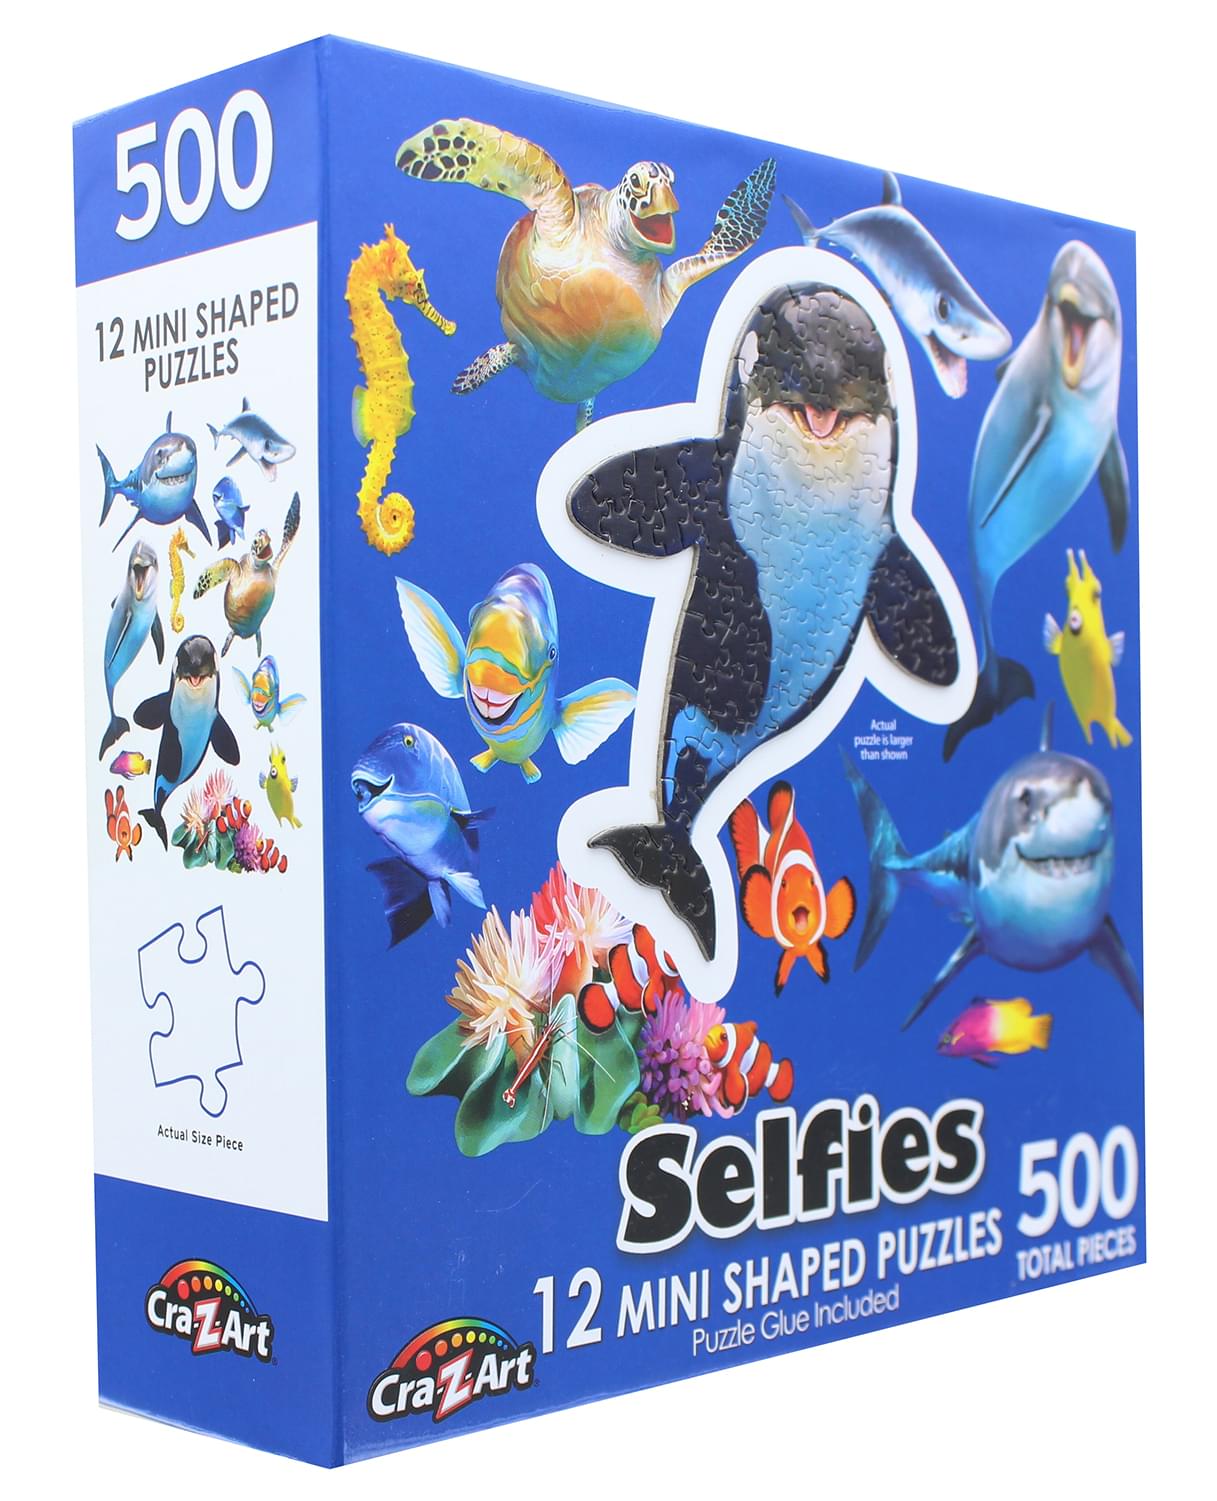 Ocean Selfies Collection Of 12 Mini Shaped Puzzles , 500 Pieces Total